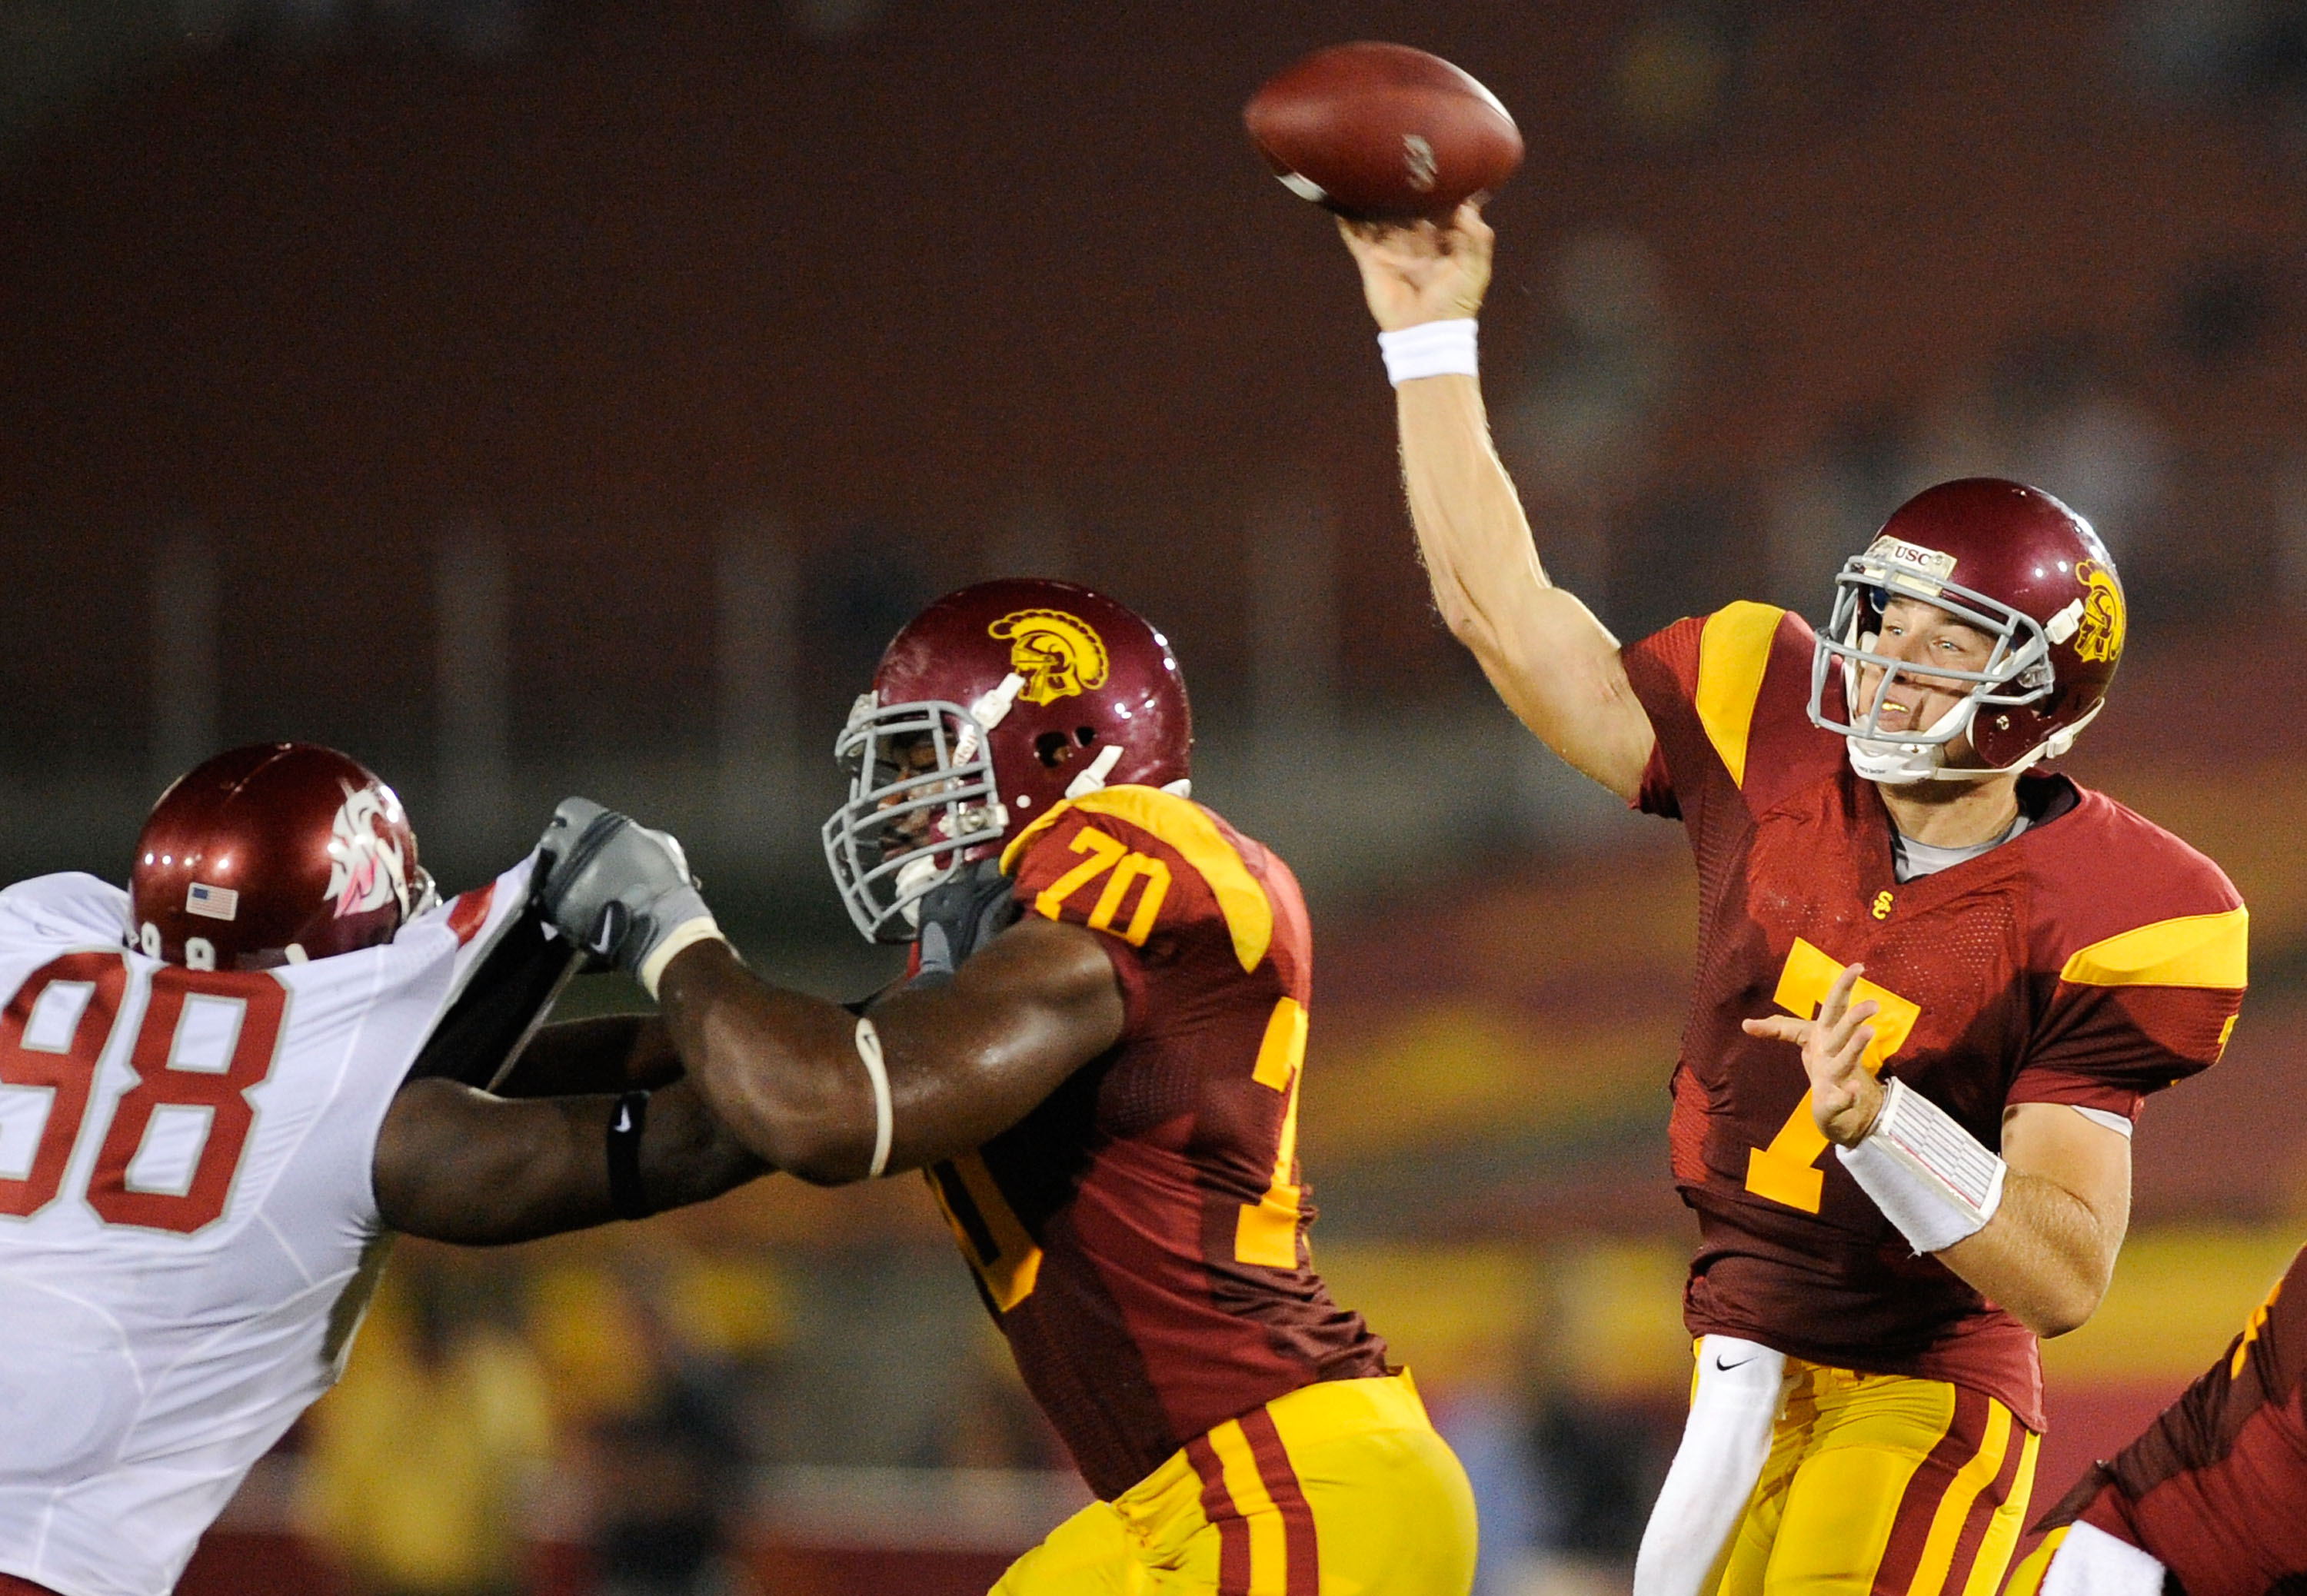 LOS ANGELES, CA - SEPTEMBER 26:   Quarterback Matt Barkley #7 of the USC Trojans throws a pass as Tyron Smith #70 blocks Jesse Feagin #98 of  the Washington State Cougars during the second quarter of the college football game at the Los Angeles Memorial C